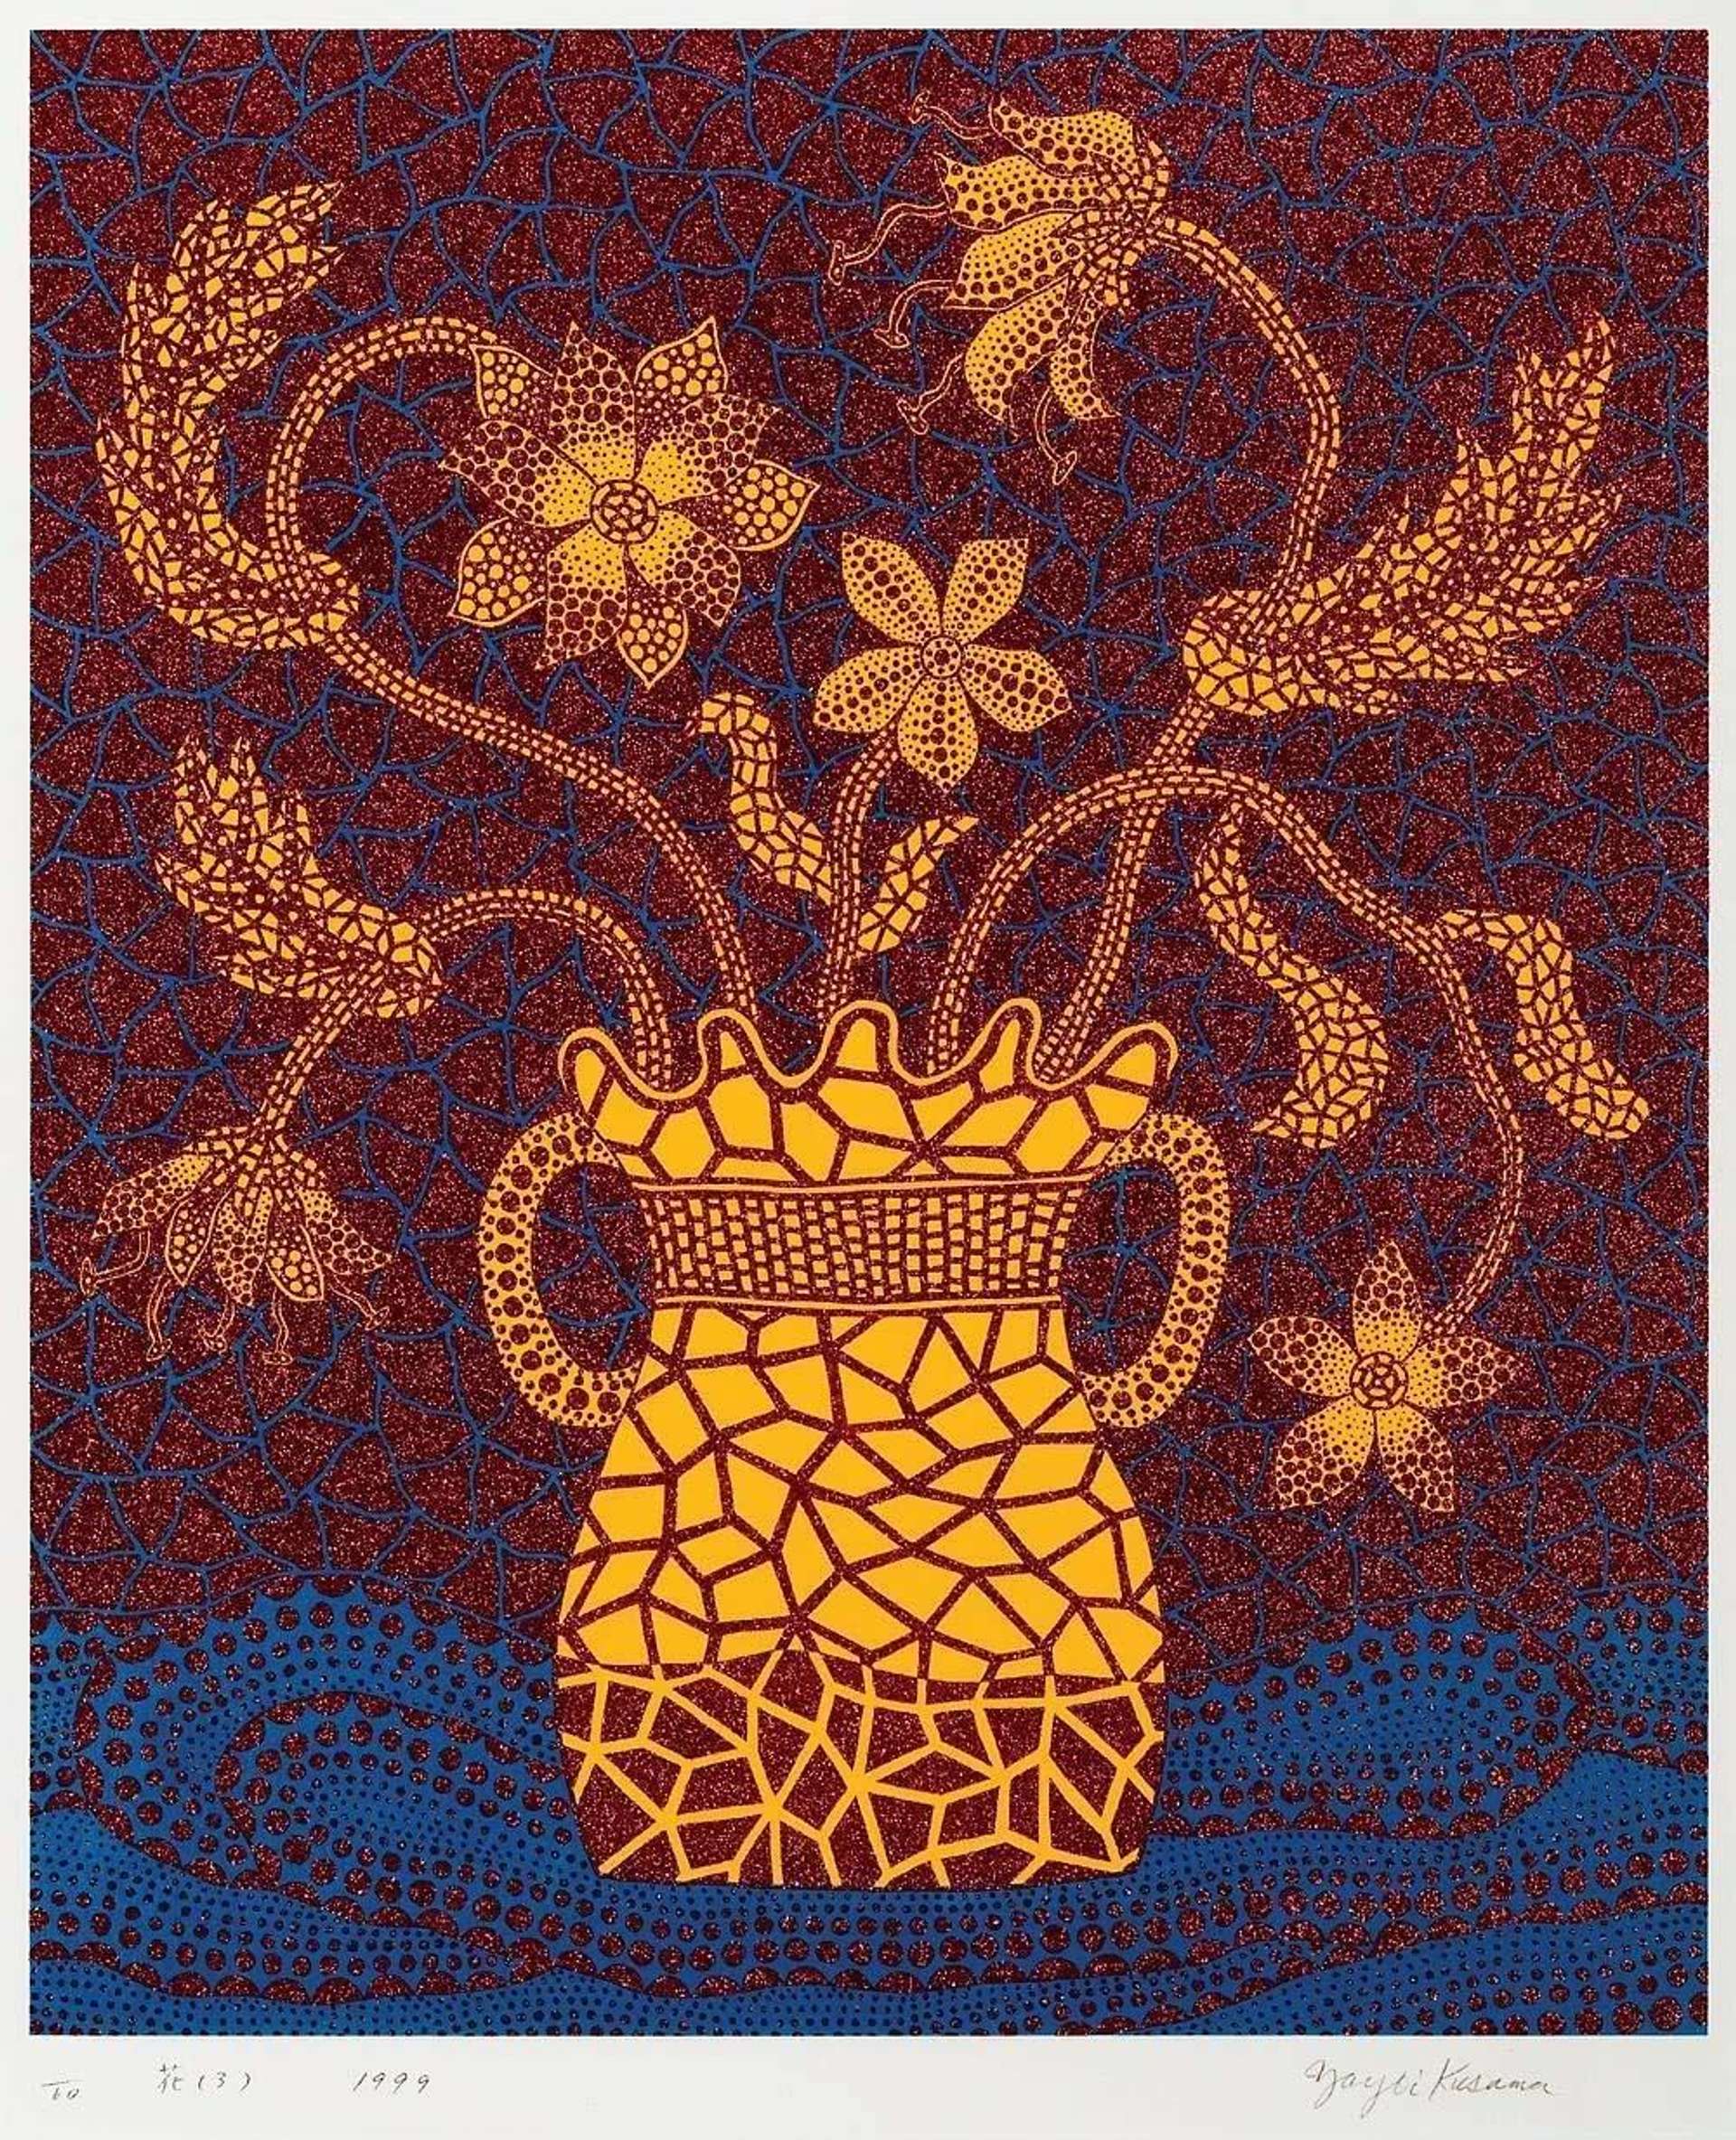 A screenprint by Yayoi Kusama depicting a yellow vase of flowers against a red and blue background, delineated with polka dots and geometric patterns